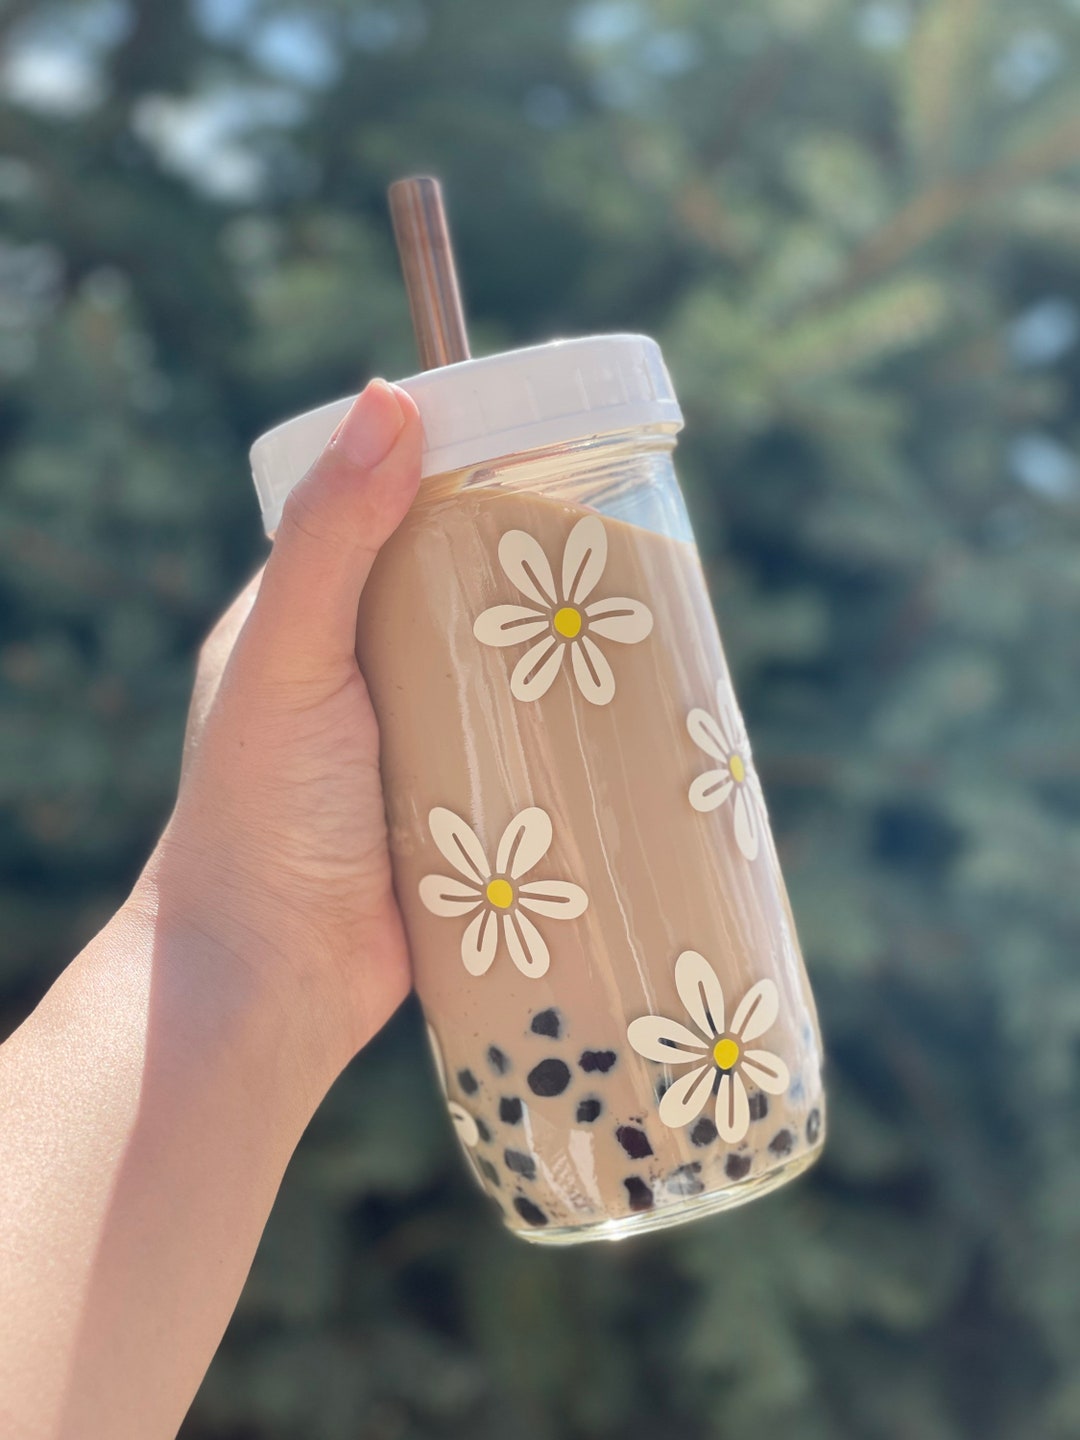 Berry Berry Strawberry Reusable Bubble Tea Cup Boba Tea/smoothie Glass Cup  With Stainless Steel Straw DIY Drinks Fruit Design 